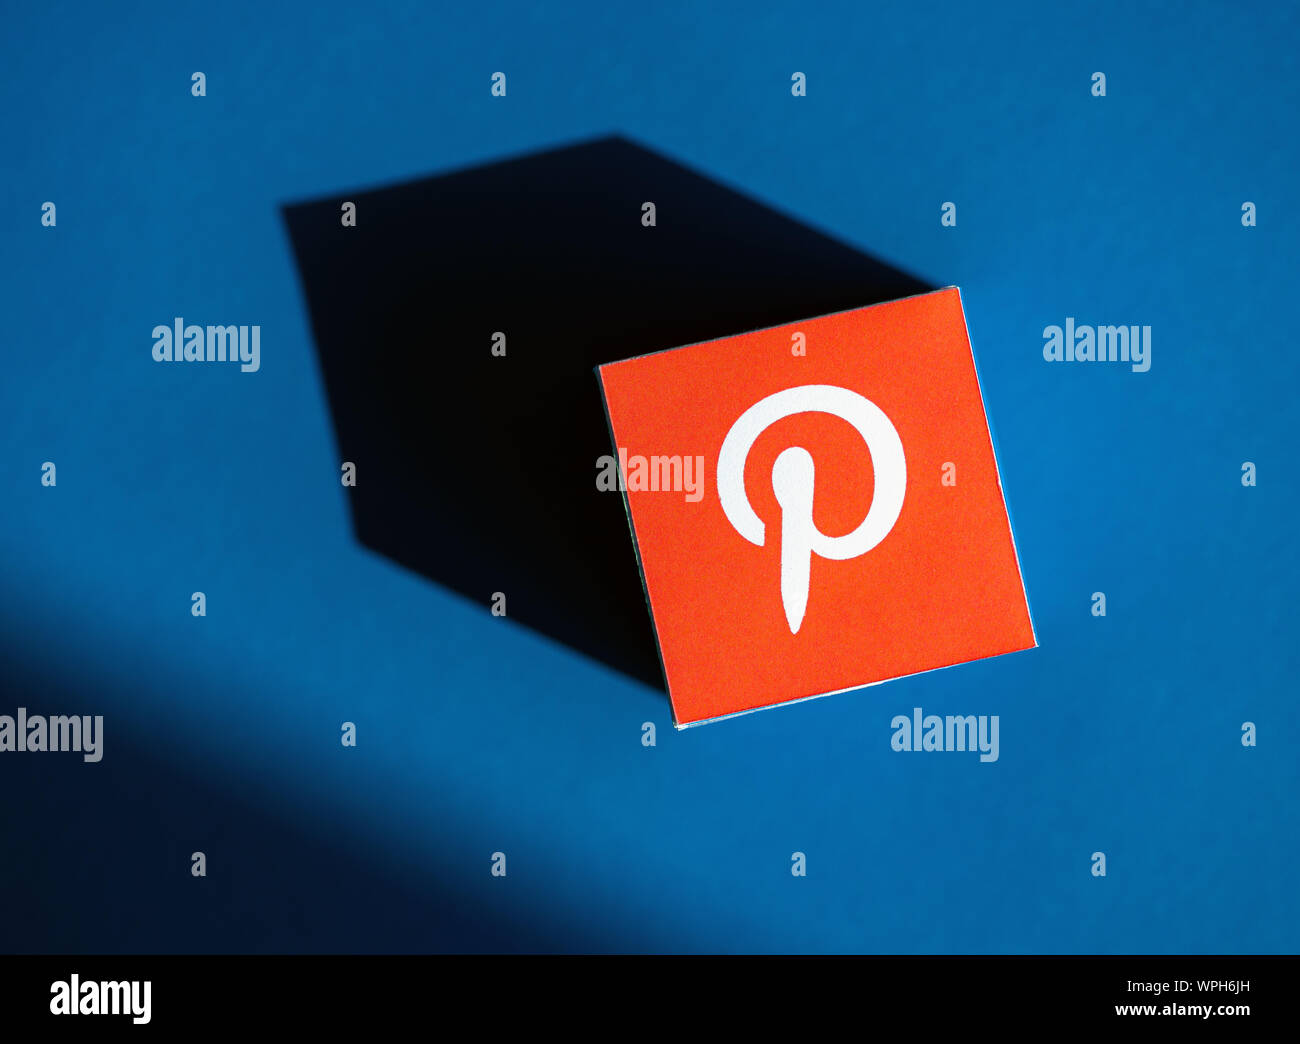 Kyiv, Ukraine - September 9, 2019: A shot from above of paper cube with the printed logotype of the Pinterest application, that placed on a blue backg Stock Photo